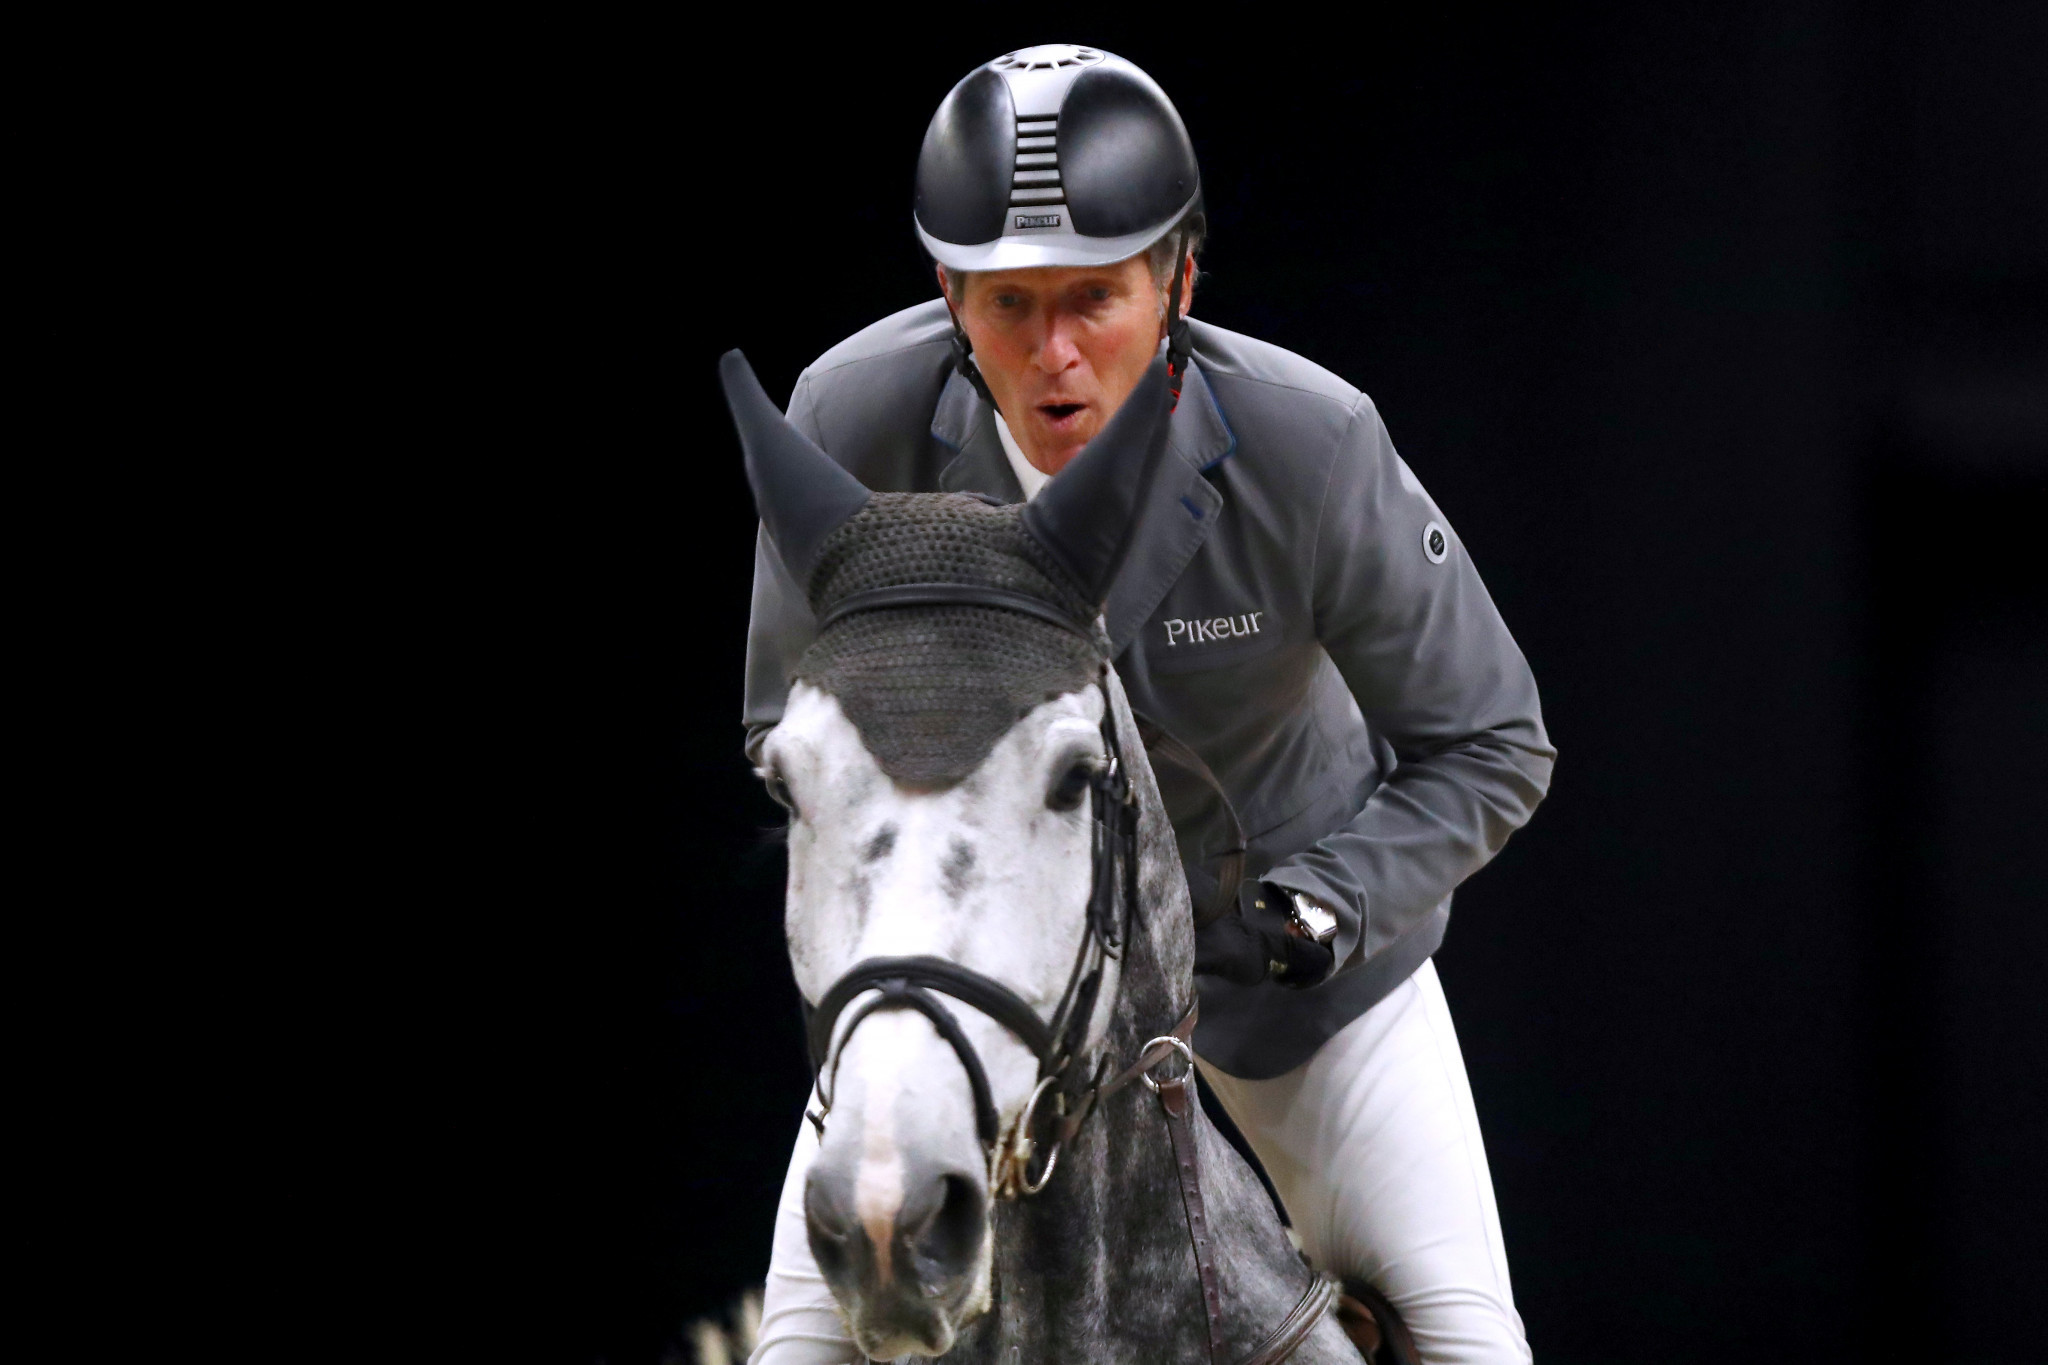 Olympic champion Beerbaum subject of criminal investigation into horse-abuse claim